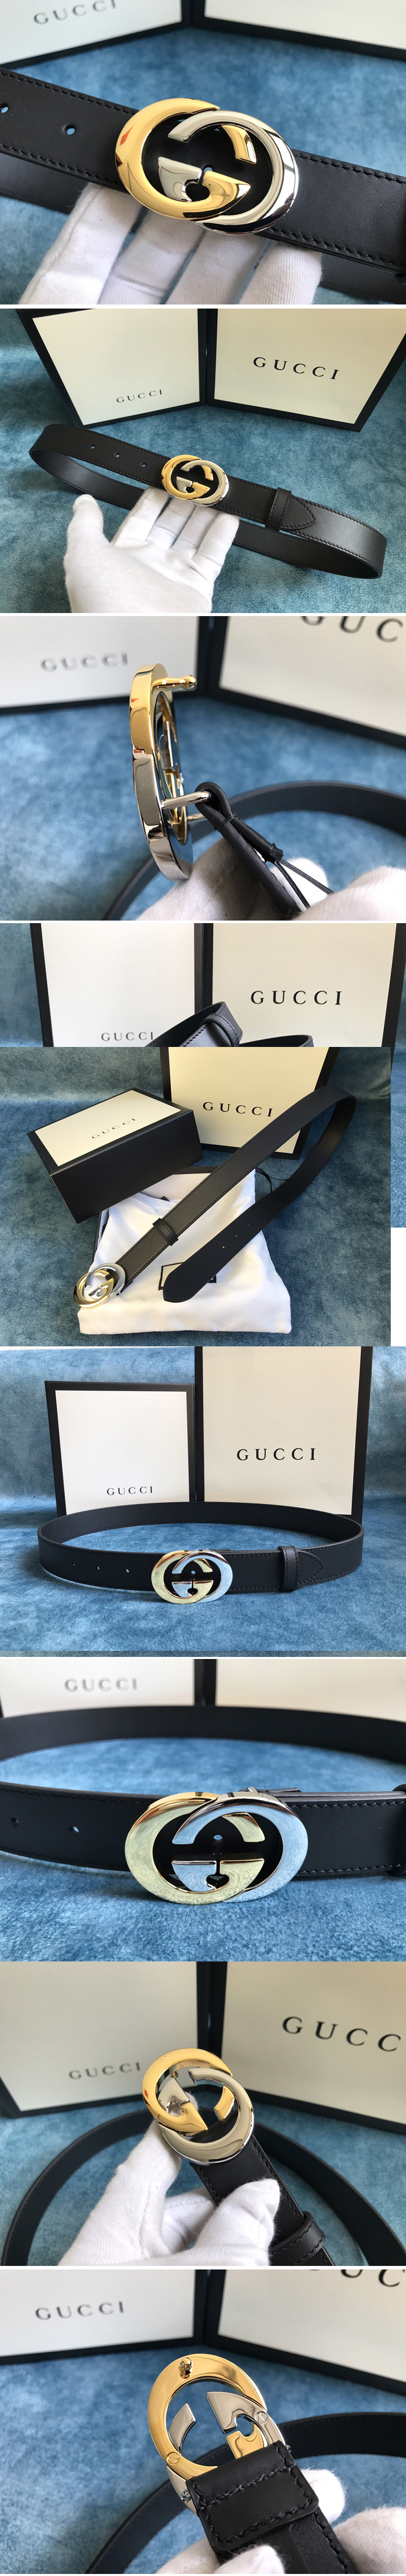 Replica Gucci 574807 30mm Belt with Shiny Gold/Silver Interlocking G buckle in Black Leather